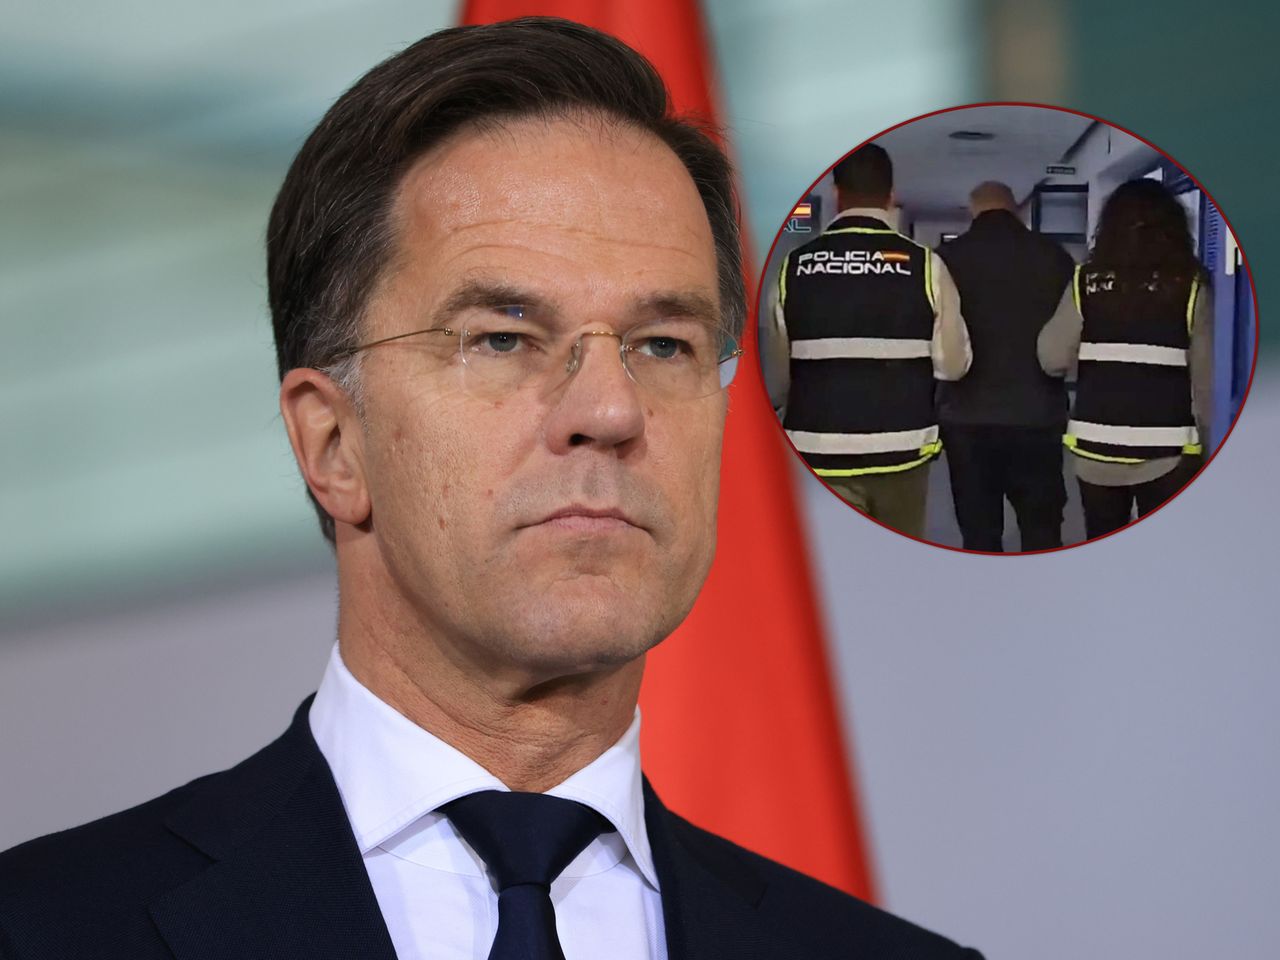 Prime Minister Marko Rutte received threats from a gang boss from the Netherlands.